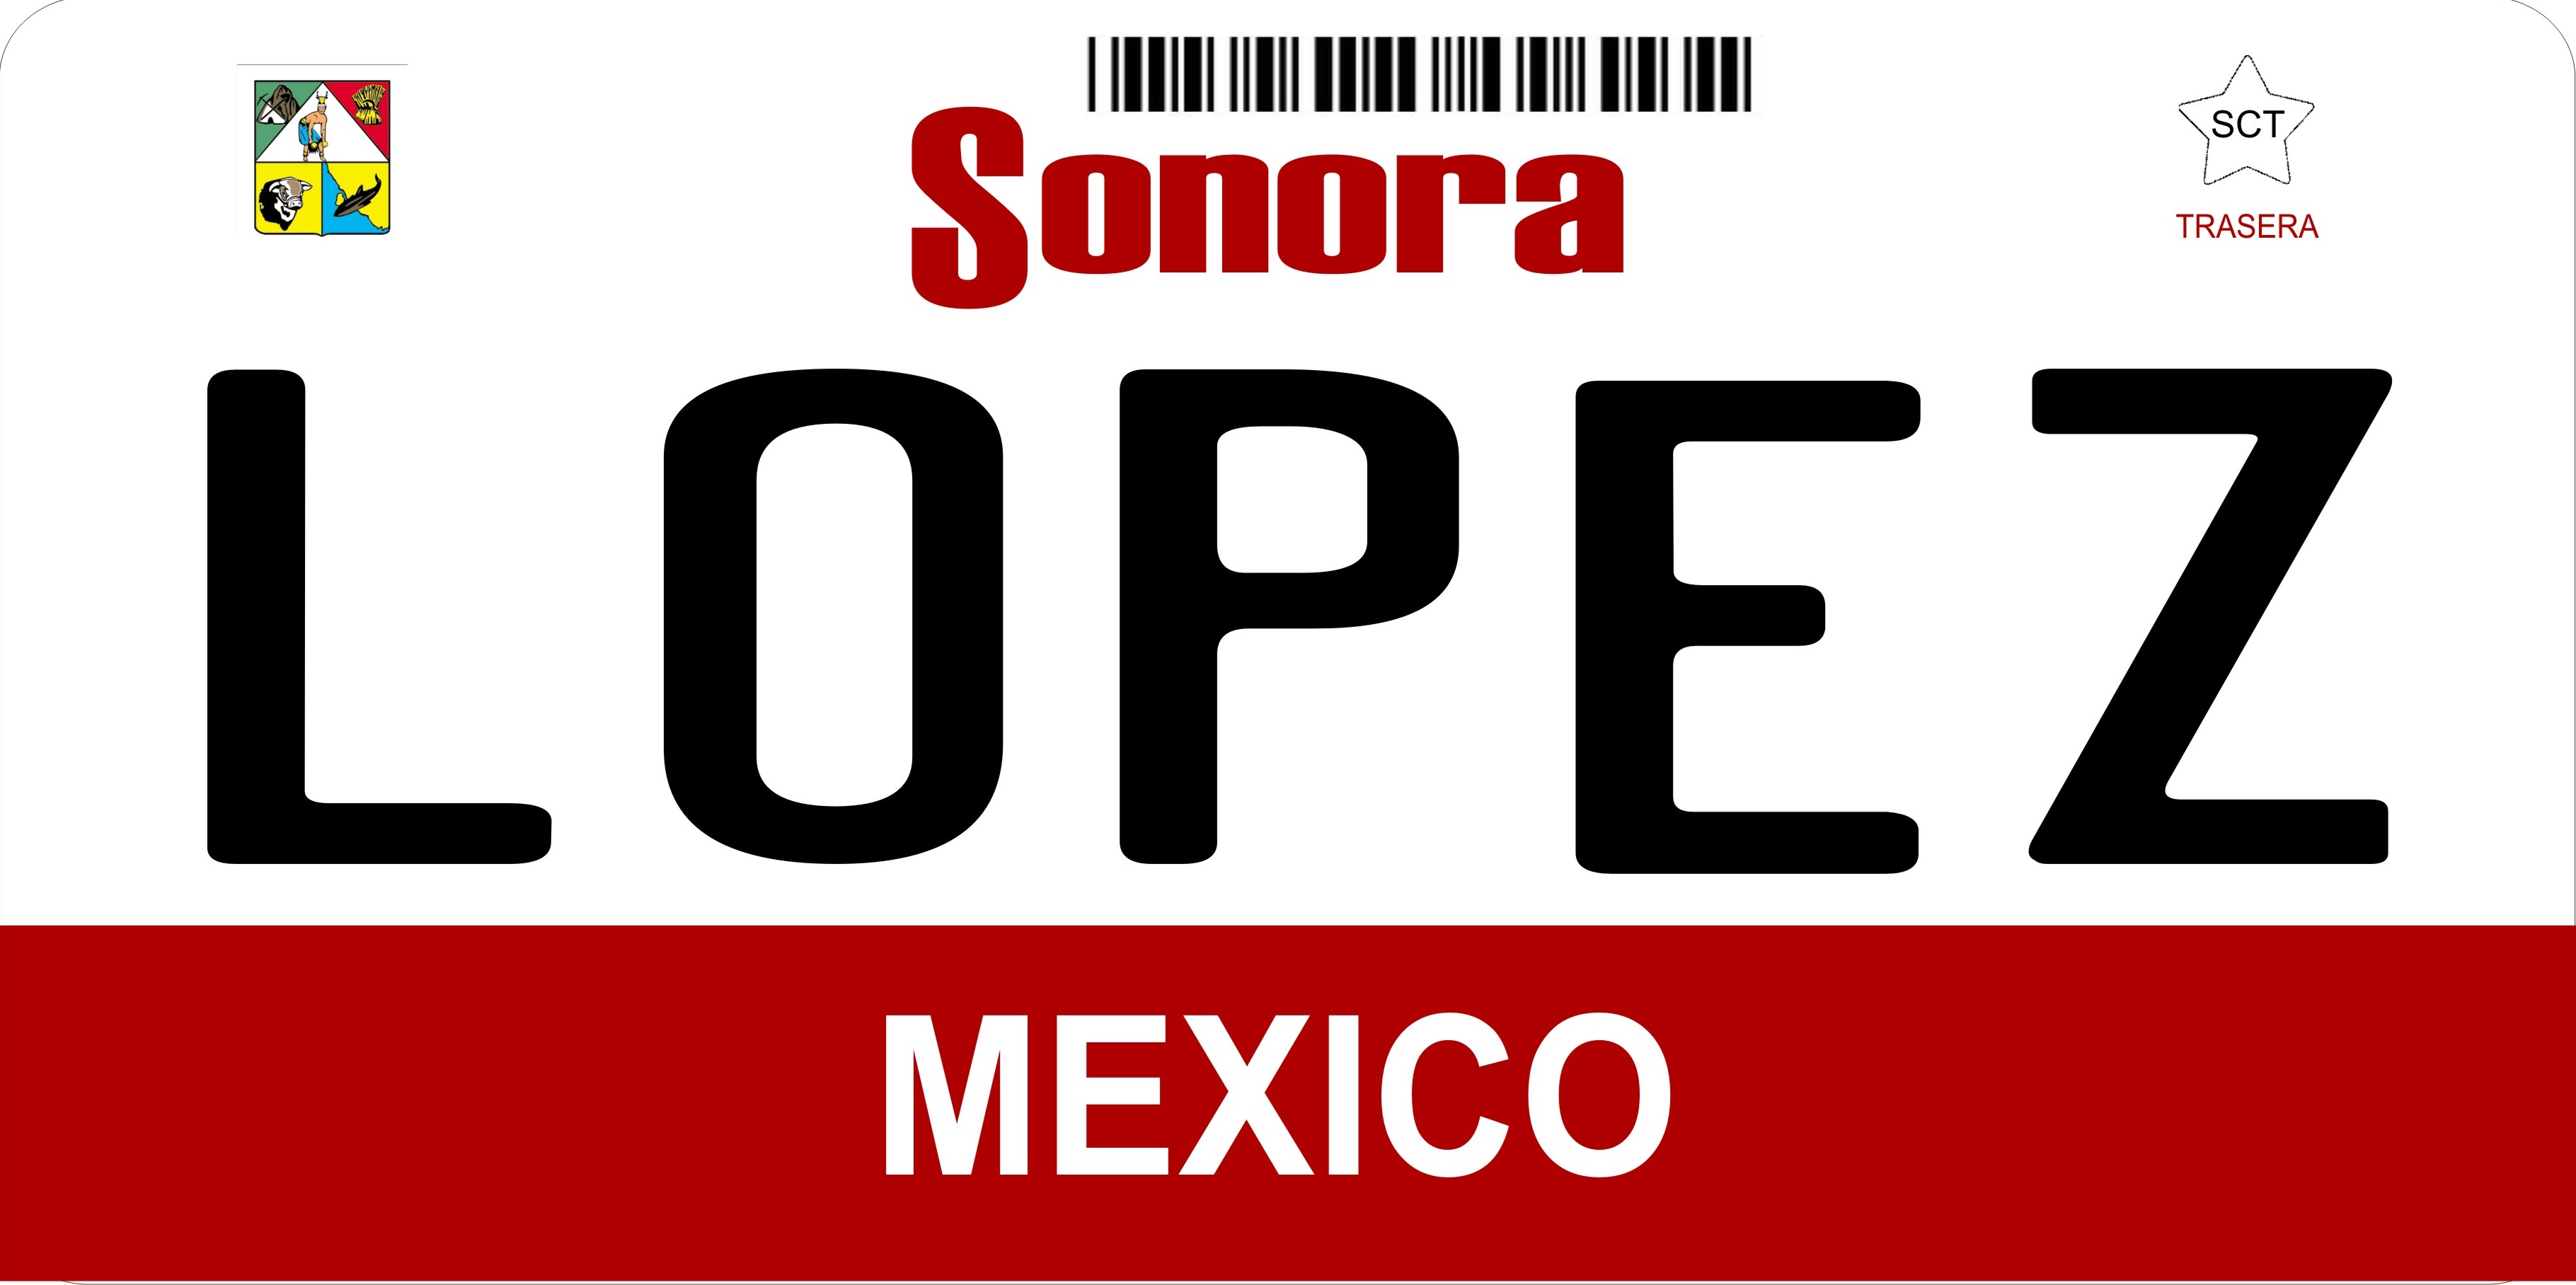 Mexico Sonora Photo LICENSE PLATE Free Personalization on this PLATE